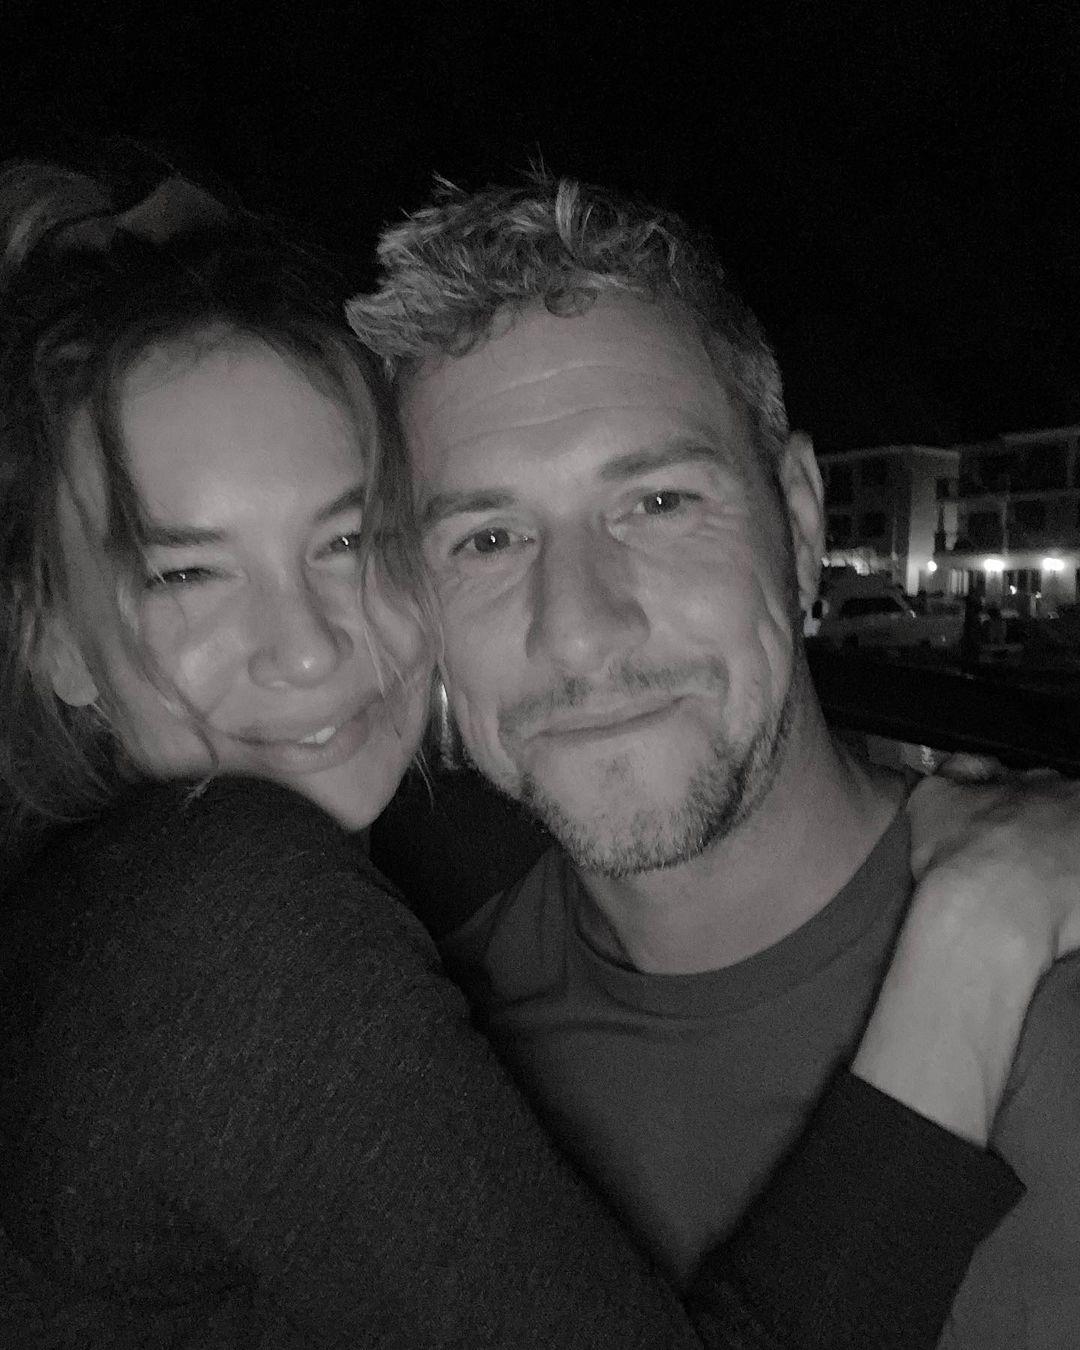 Renée Zellweger And Ant Anstead Go Instagram Official After 3 Months Of Dating! 